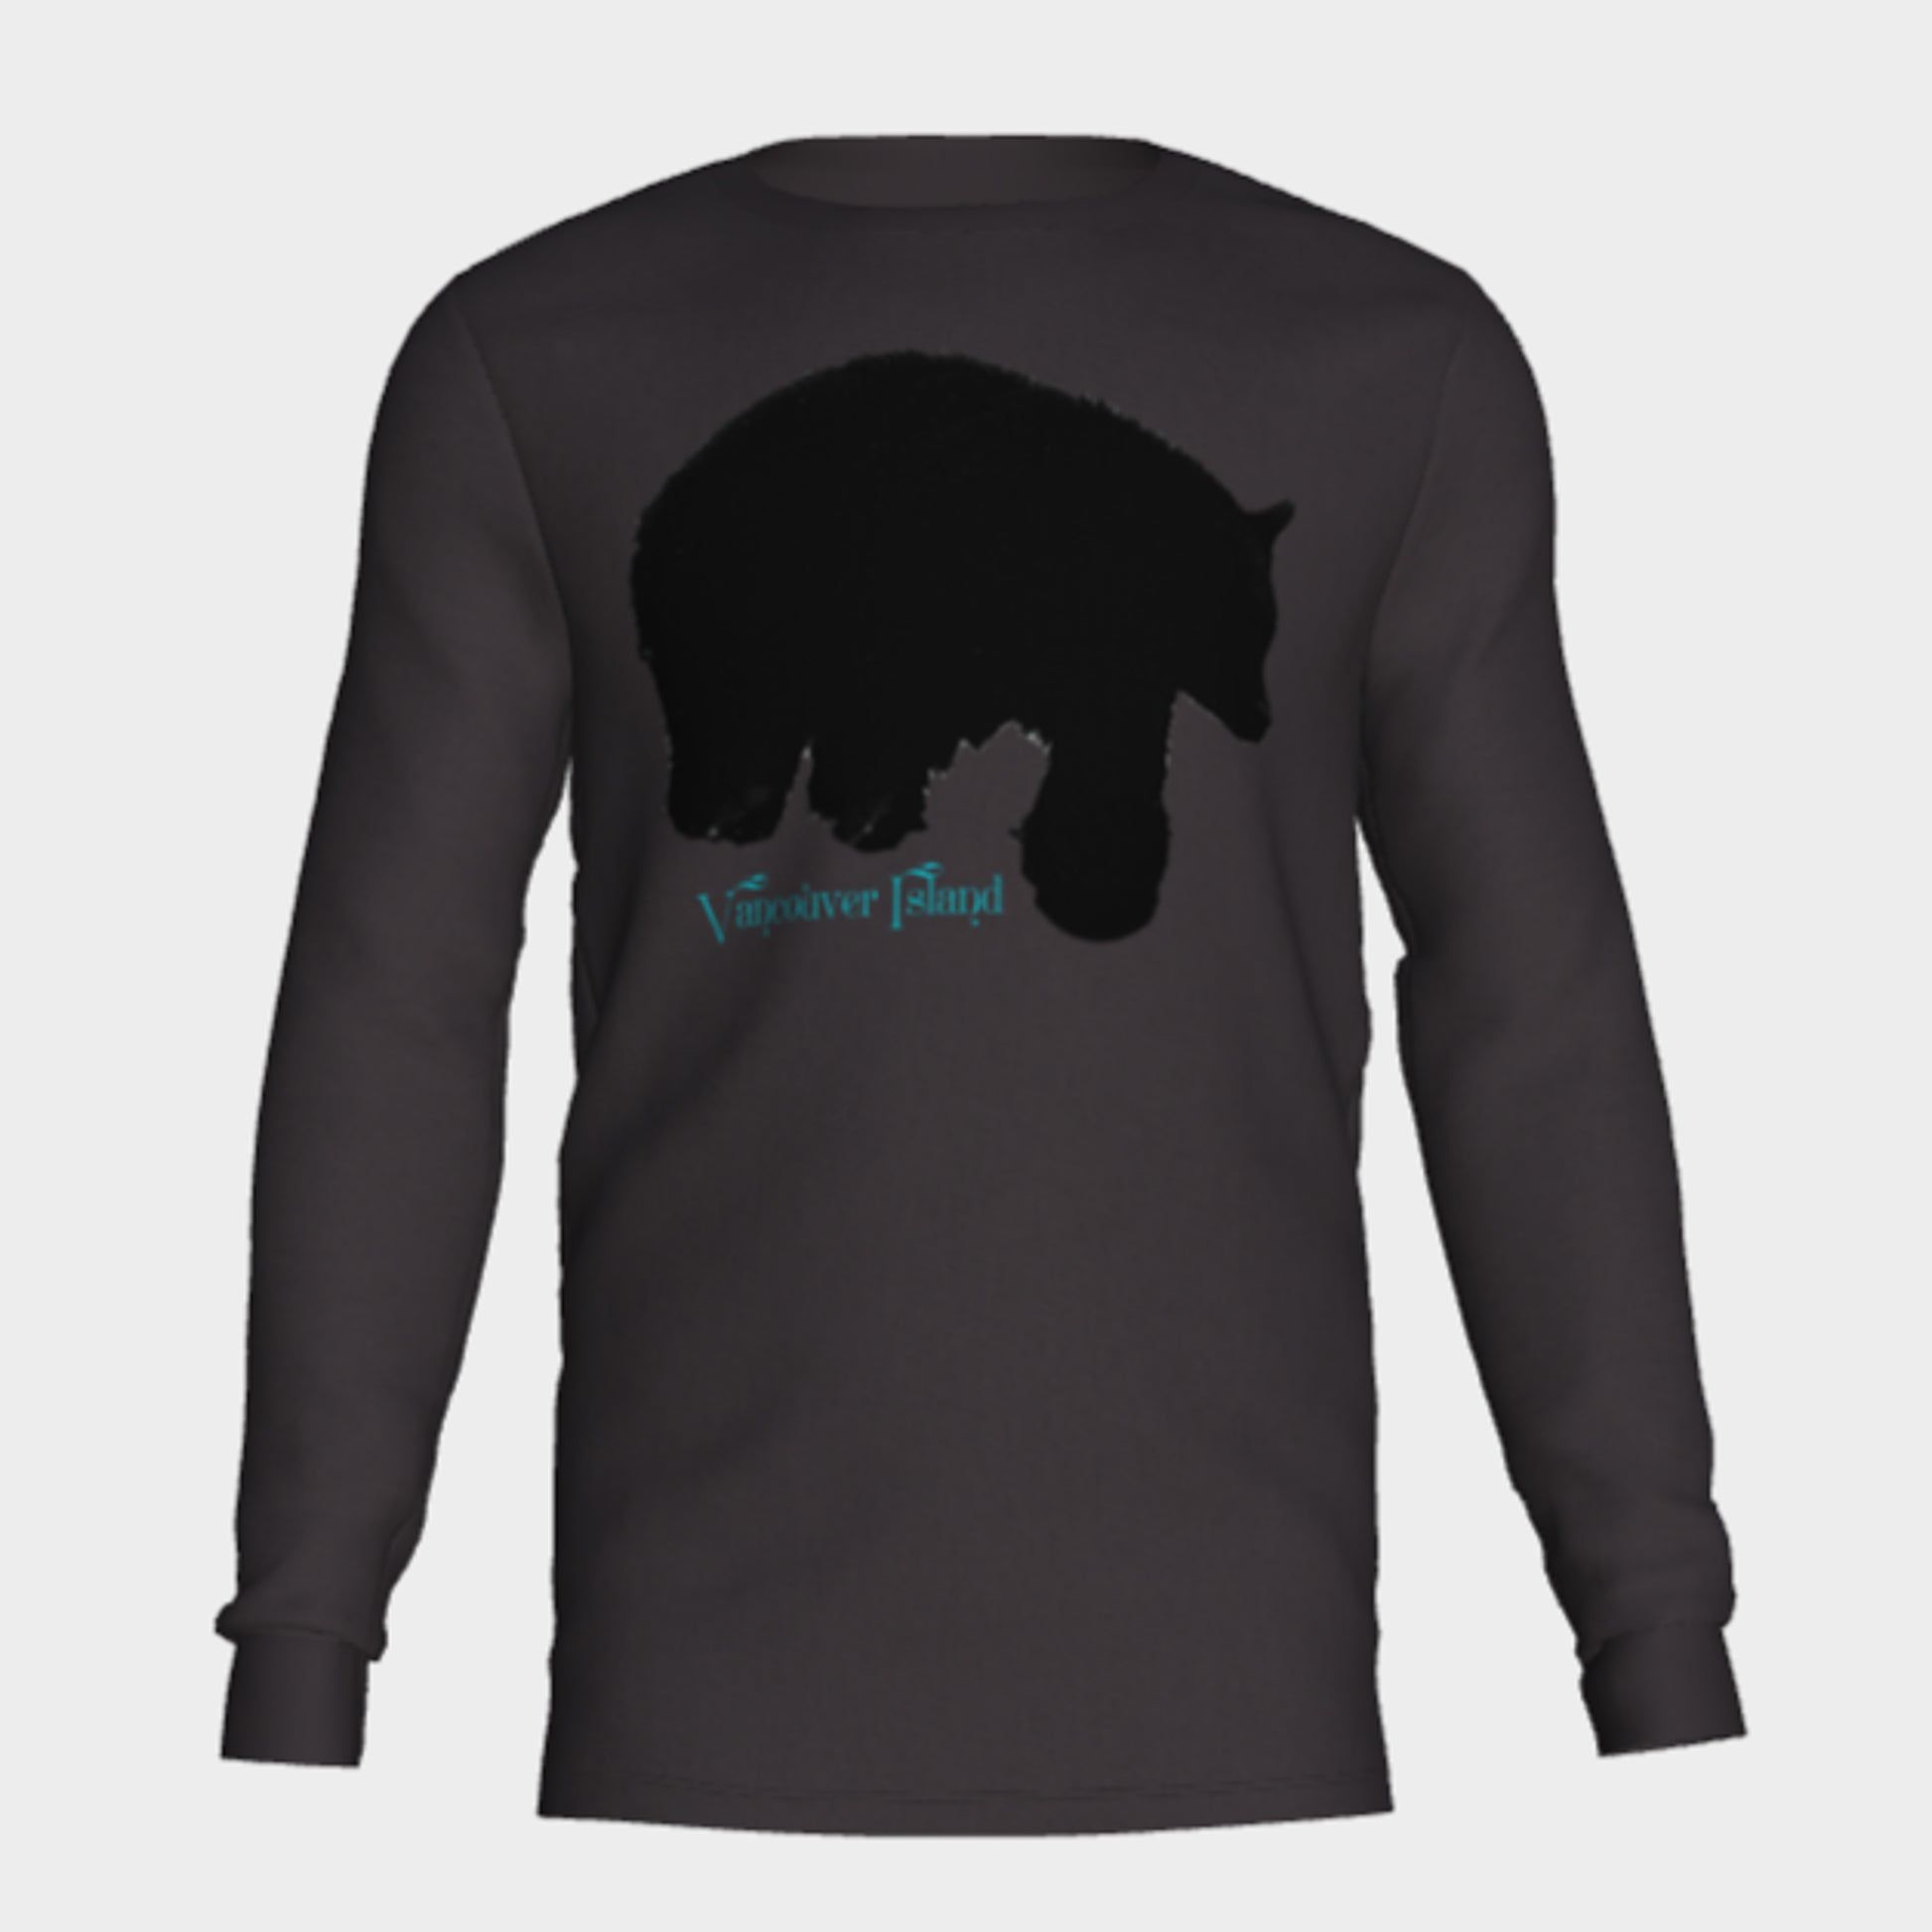 Bear Vancouver Island Long Sleeve Unisex T-Shirt Van Isle Goddess 100% cotton crew neck long sleeve super comfy tee is a must-have basic for any wardrobe.  Whether you’re going to a gig, a sports game, a rally, or just walking down the street, this lightweight, 100% cotton crew neck is perfect!  Features:  Flattering unisex fit Cozy long sleeves Crew neck Made with Milltex lightweight fabric